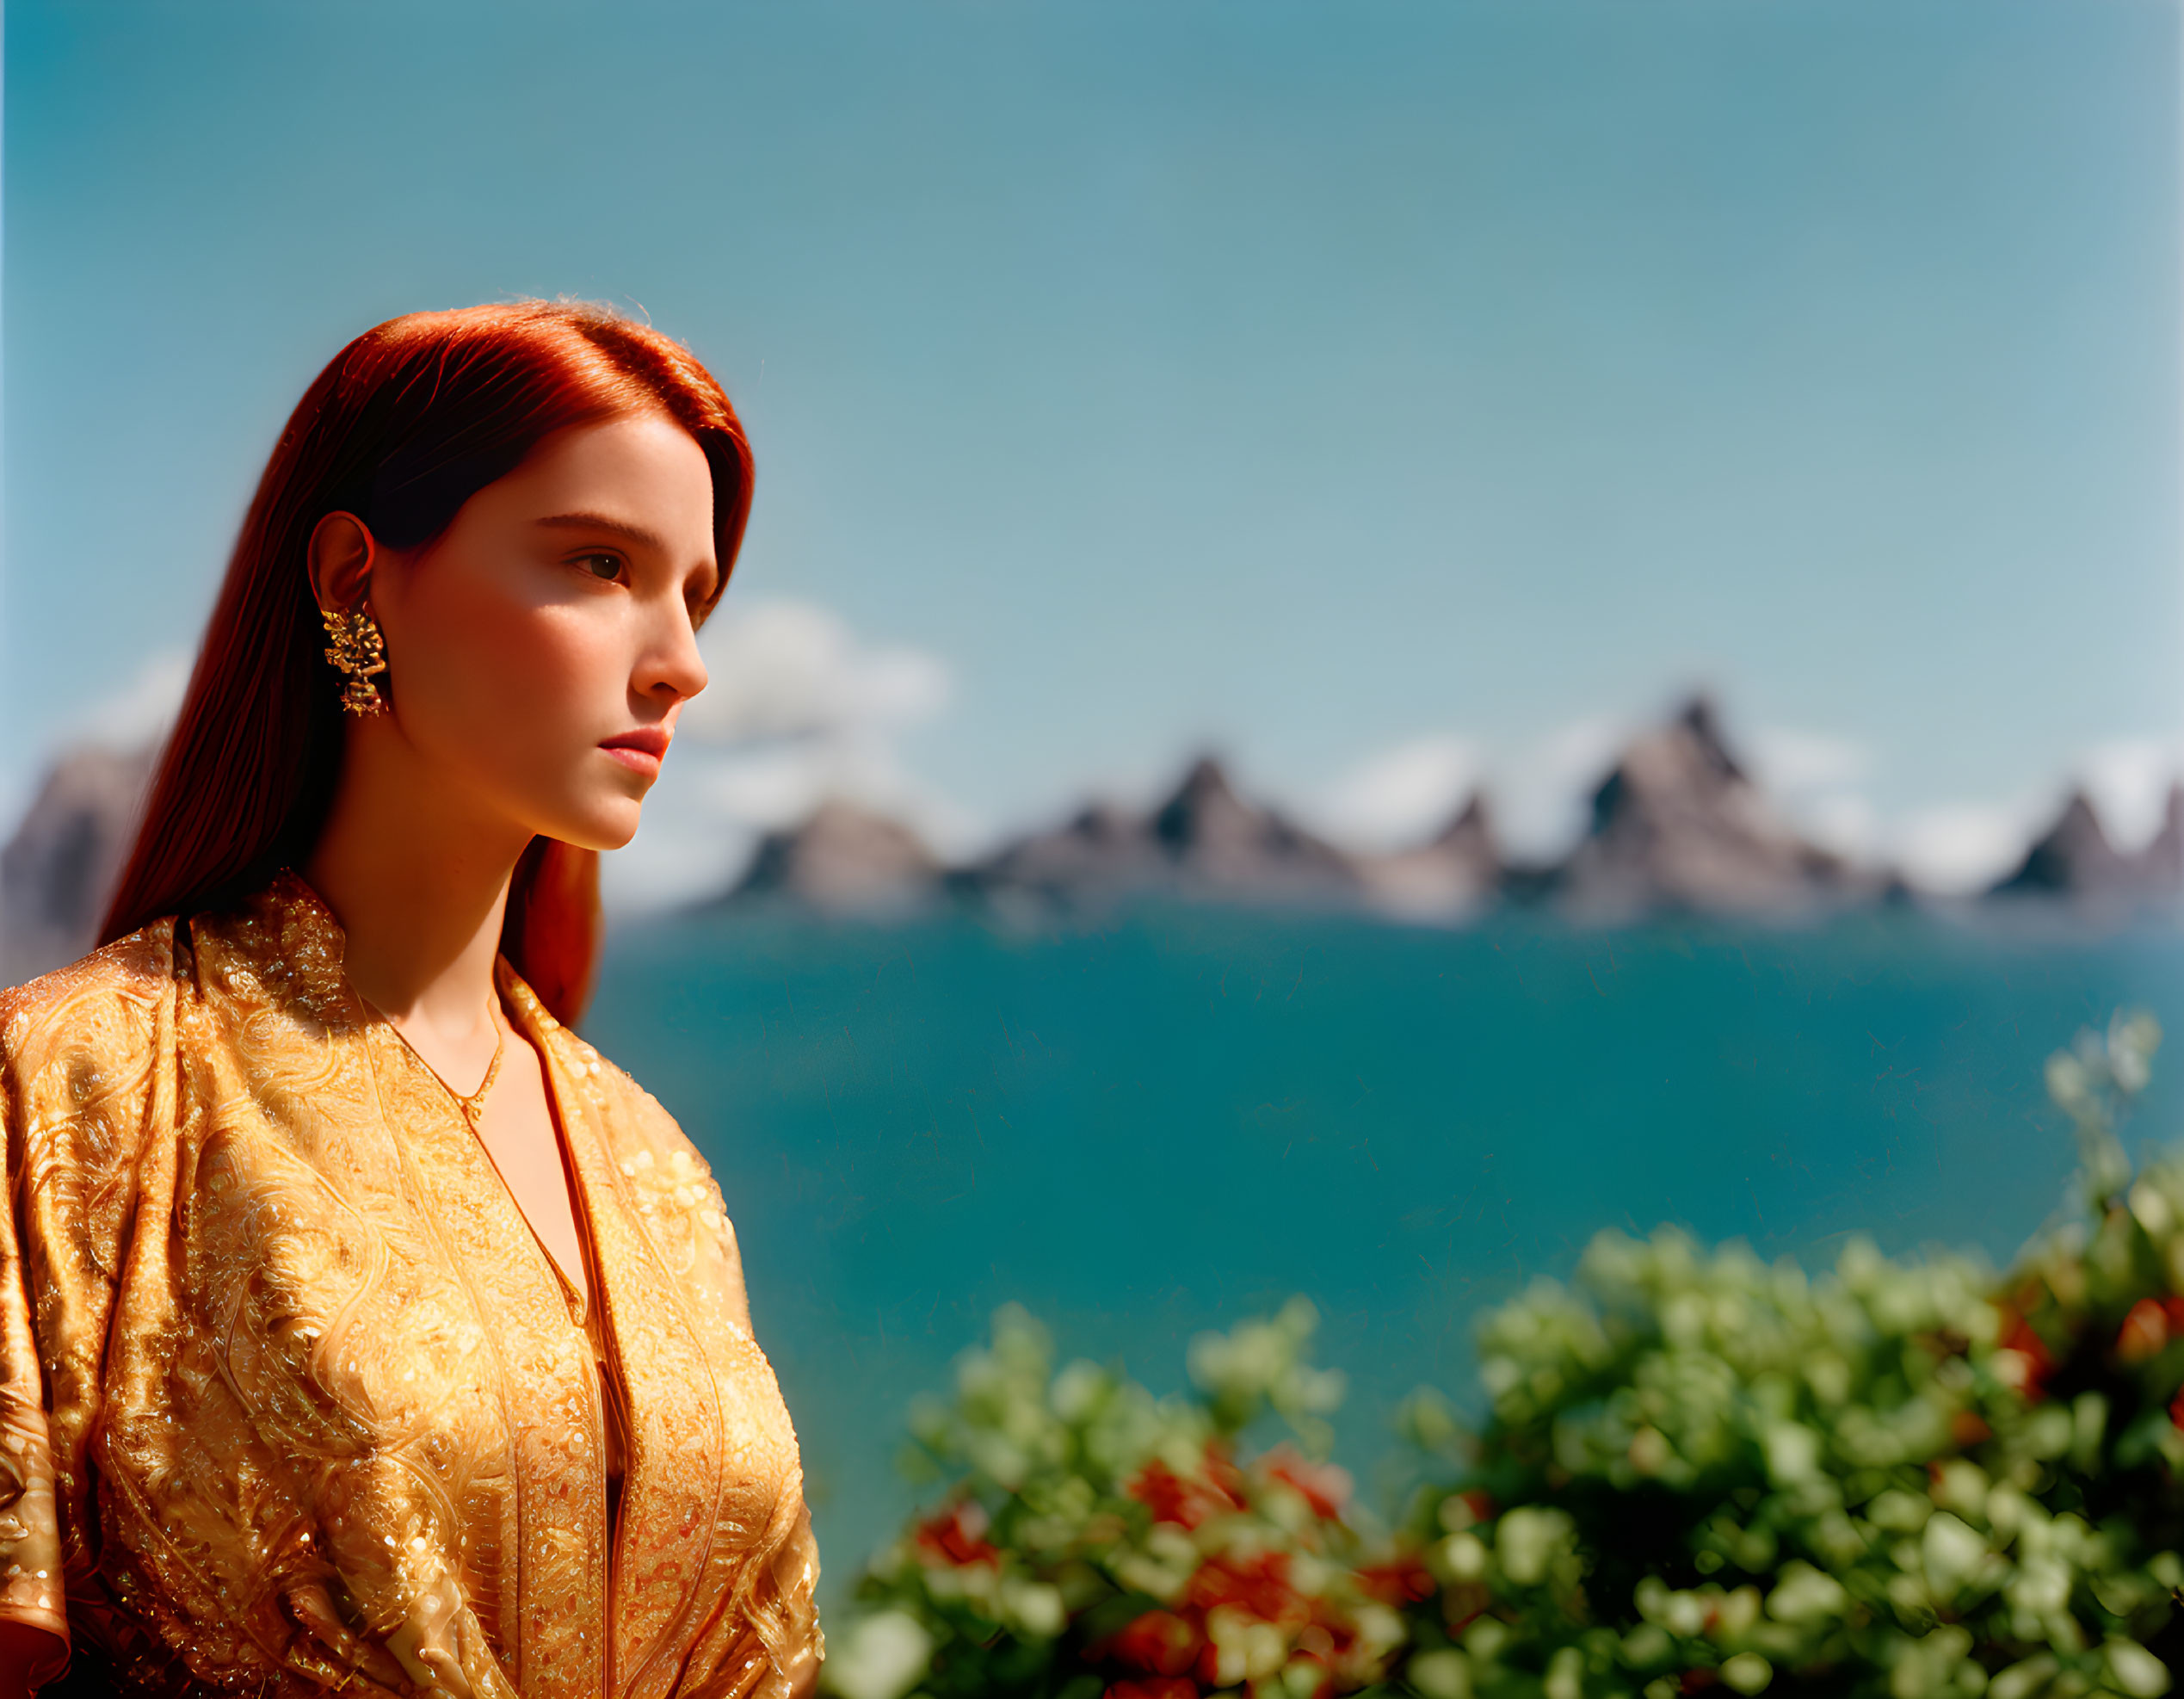 Red-Haired Woman in Golden Dress by Lake and Mountains